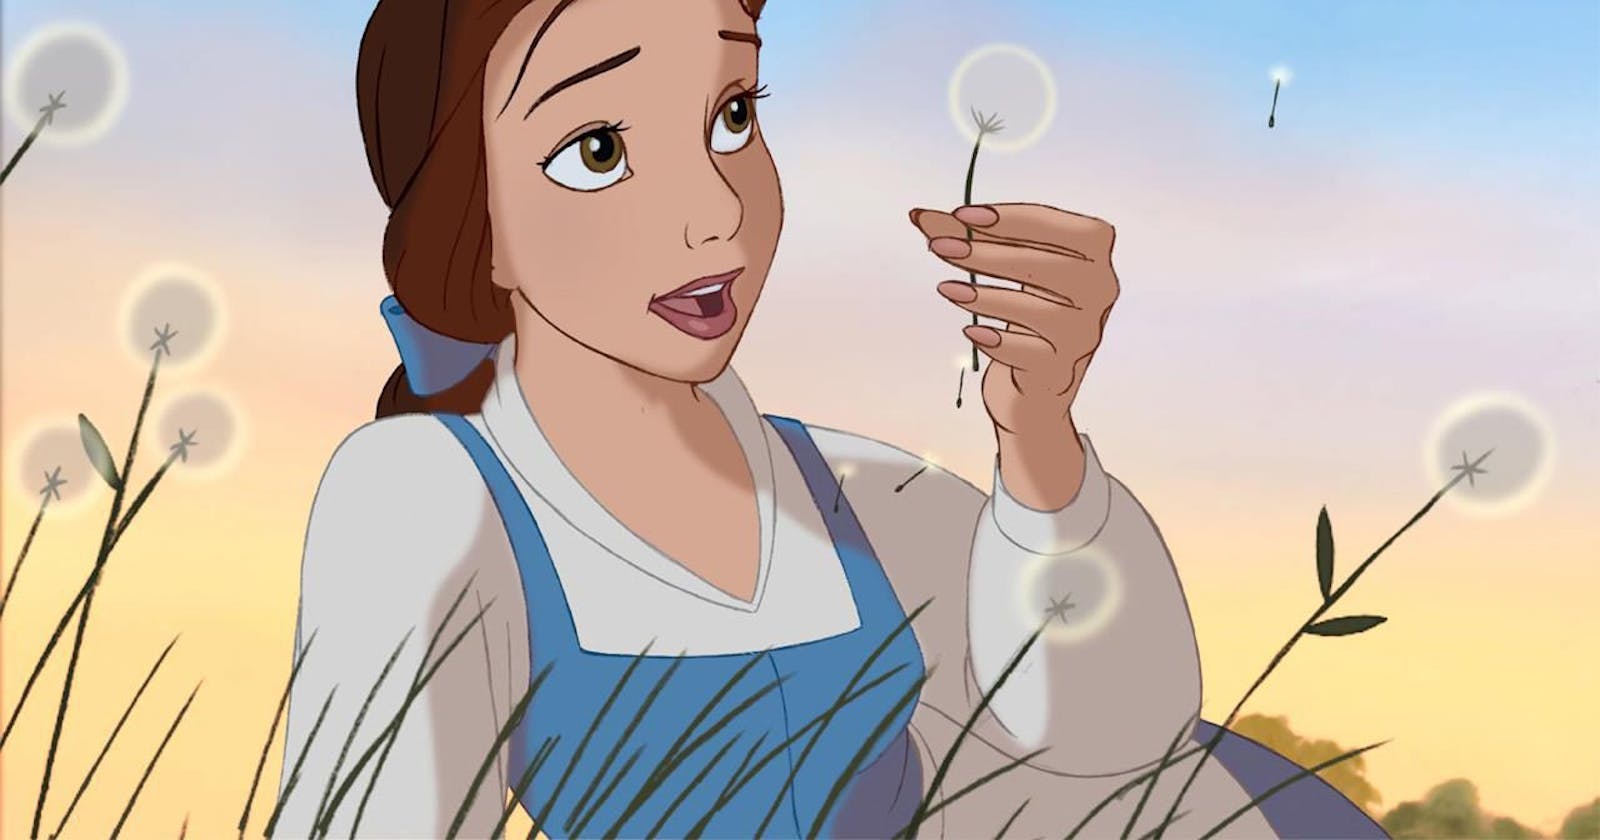 How Old is Belle from Beauty and the Beast?